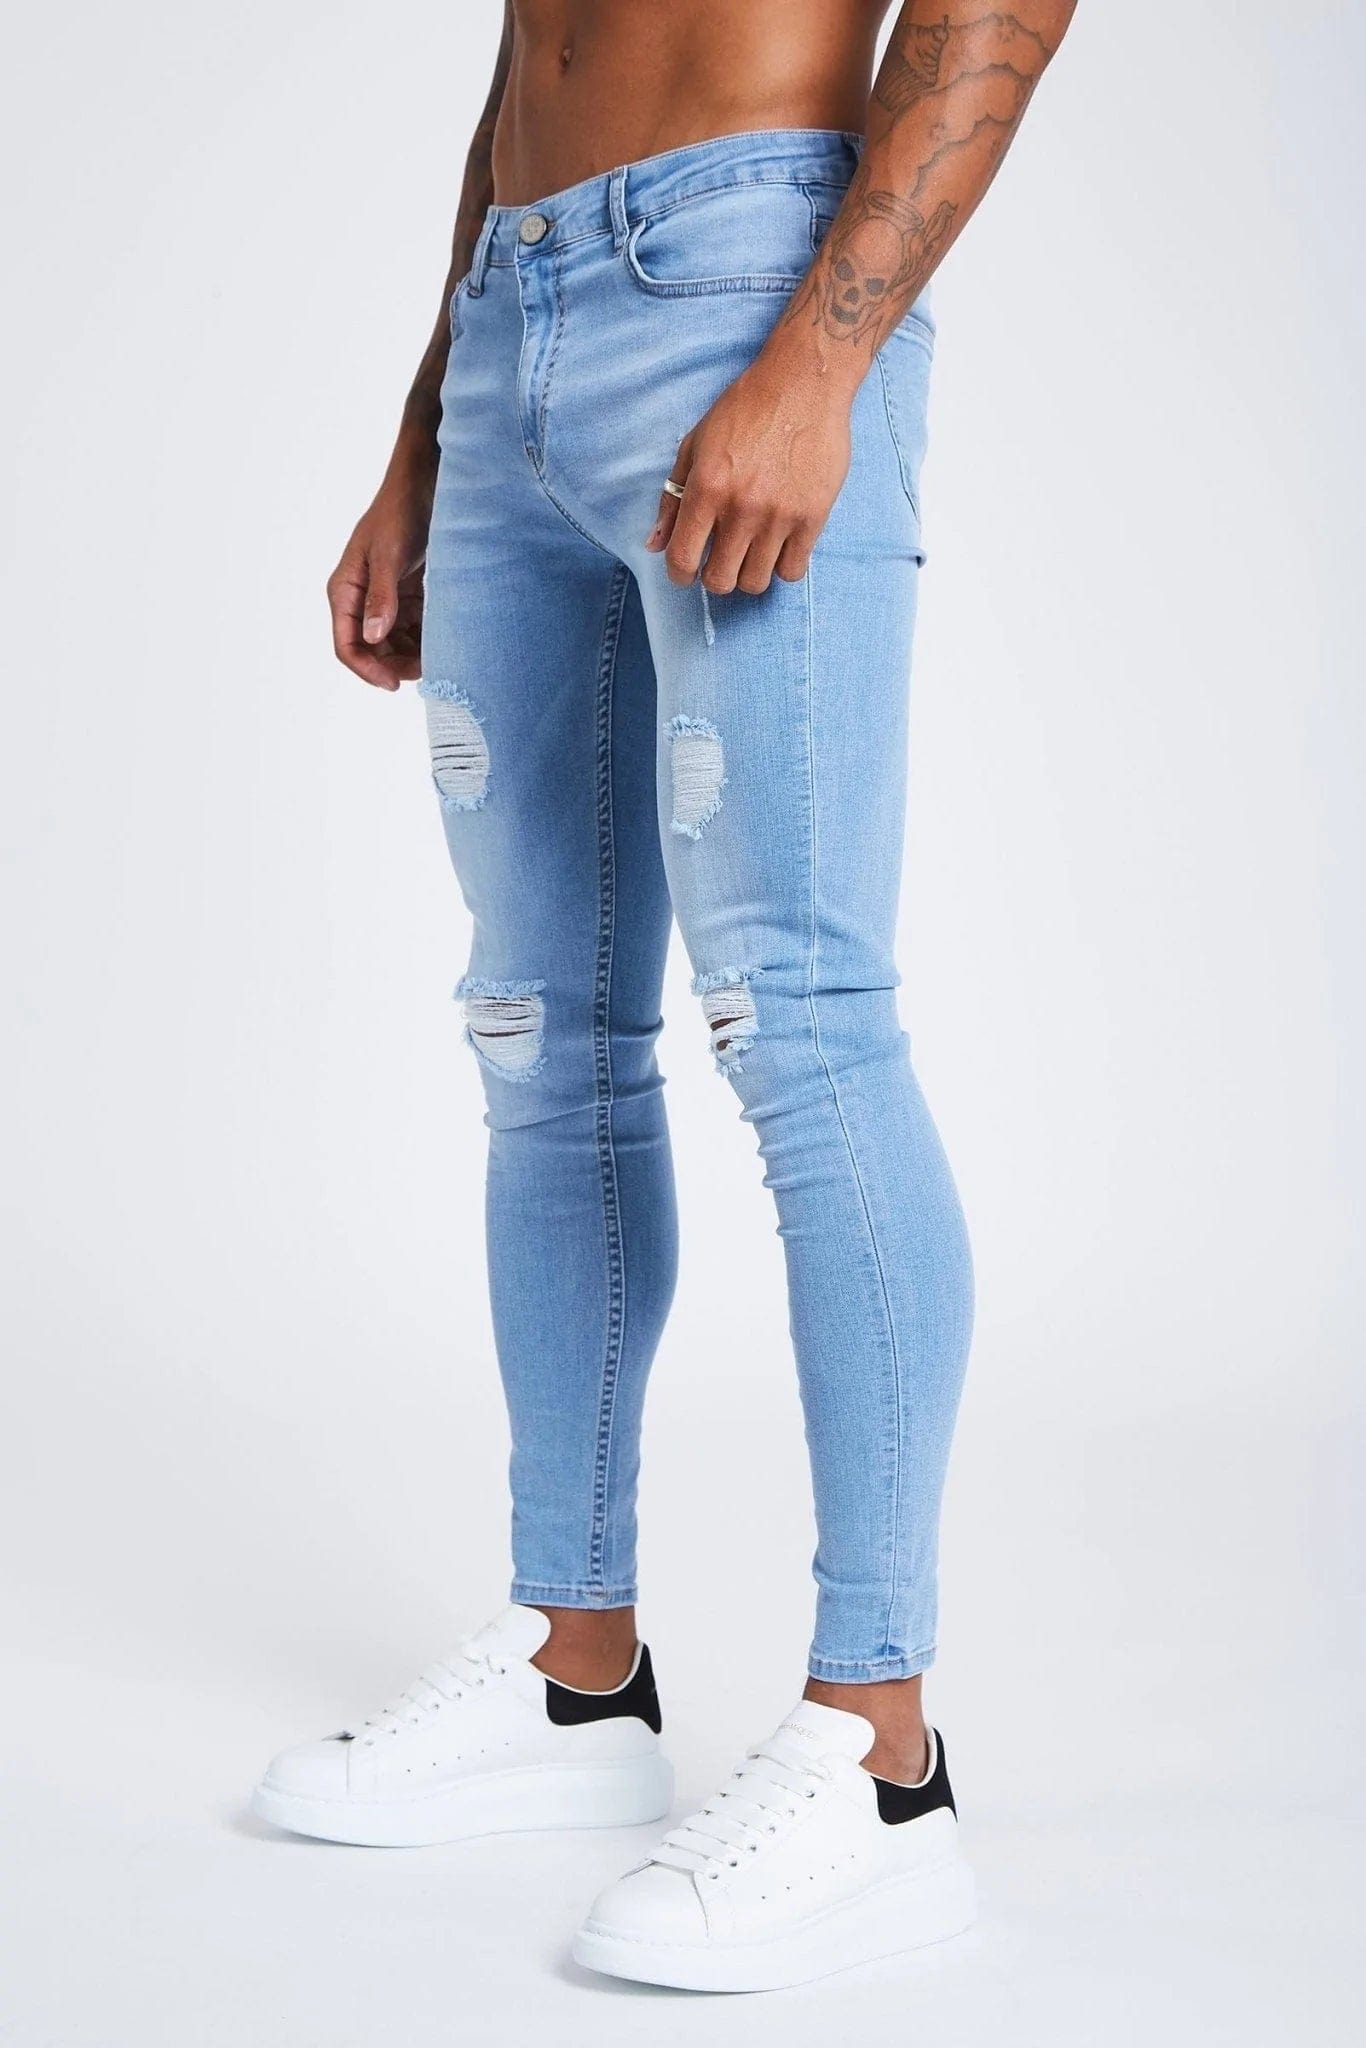 Legend London Jeans Light Blue Jeans - Ripped &amp; Repaired